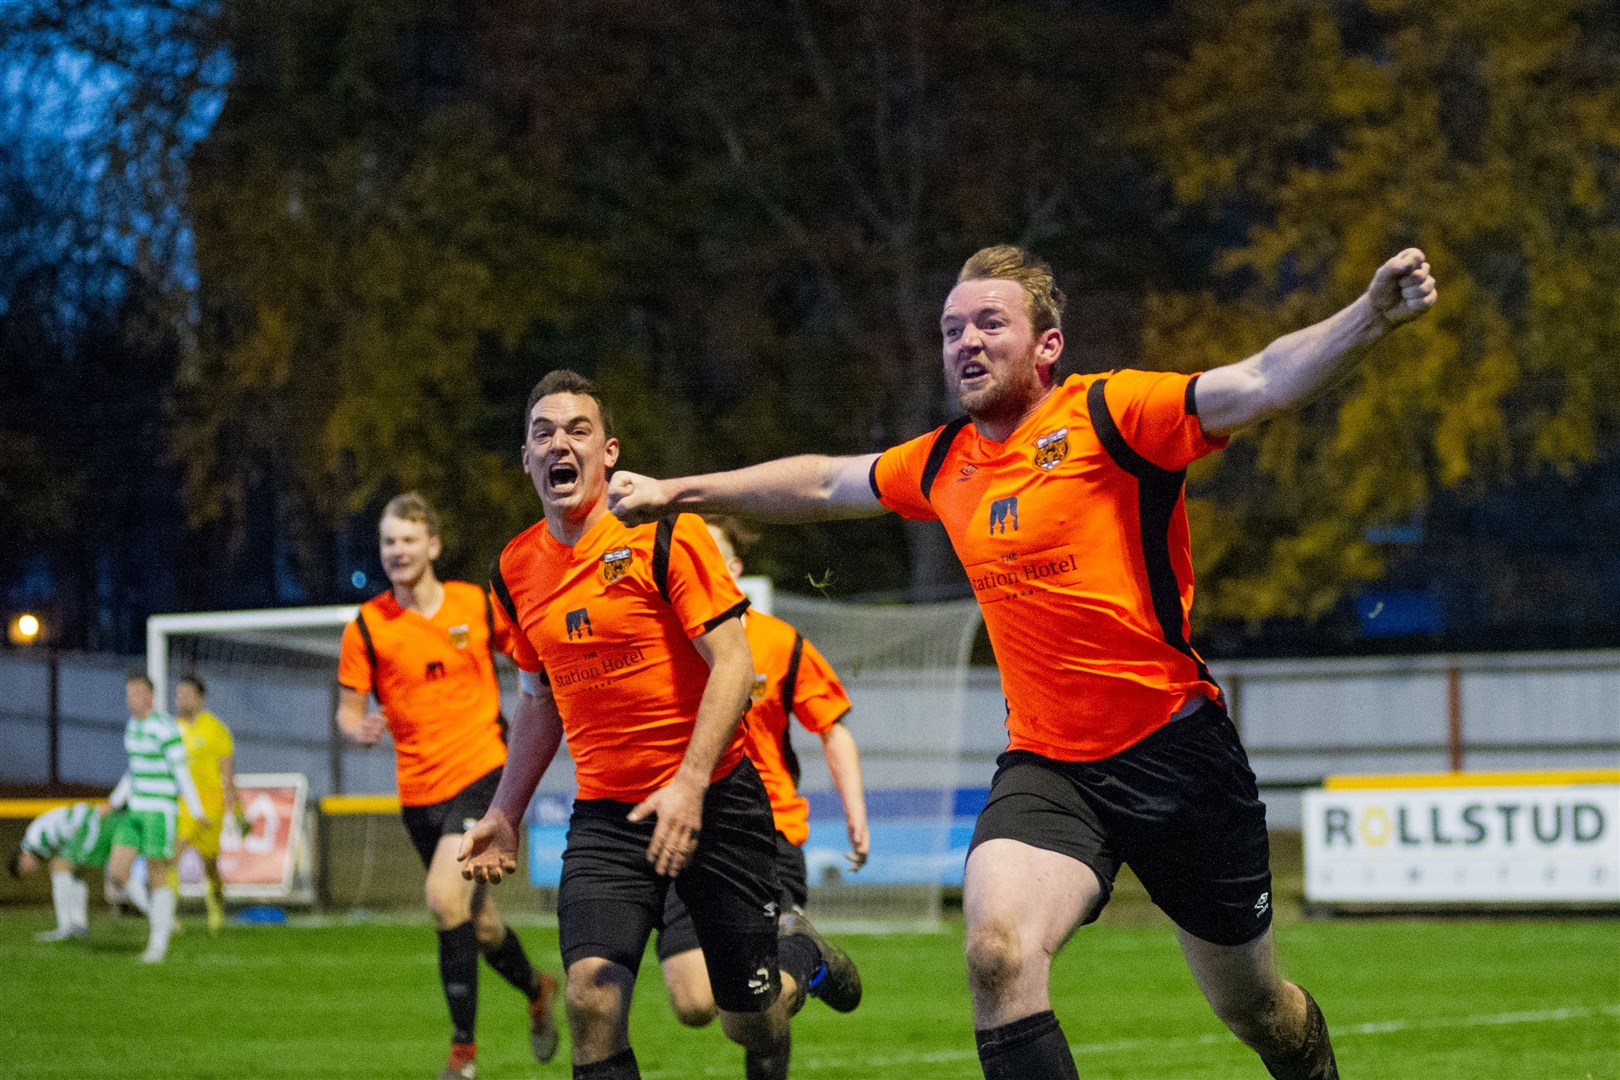 Paul MacLeod wheels away in celebration after scoring the most dramatic of 94th minute winners. Picture: Daniel Forsyth